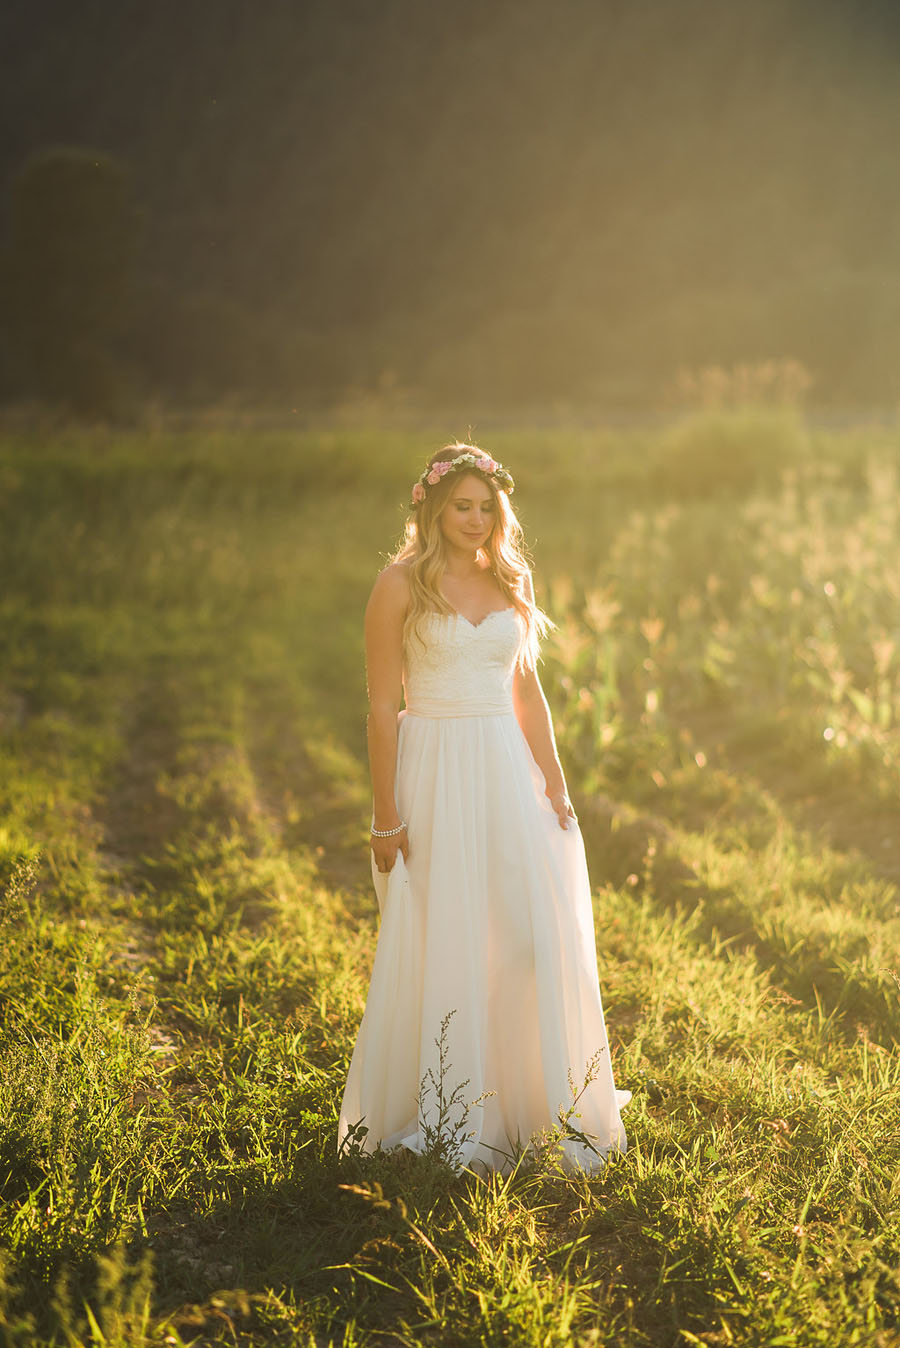 A Gorgeous Antique & Vintage Finds DIY Wedding in an Apple Orchard ...